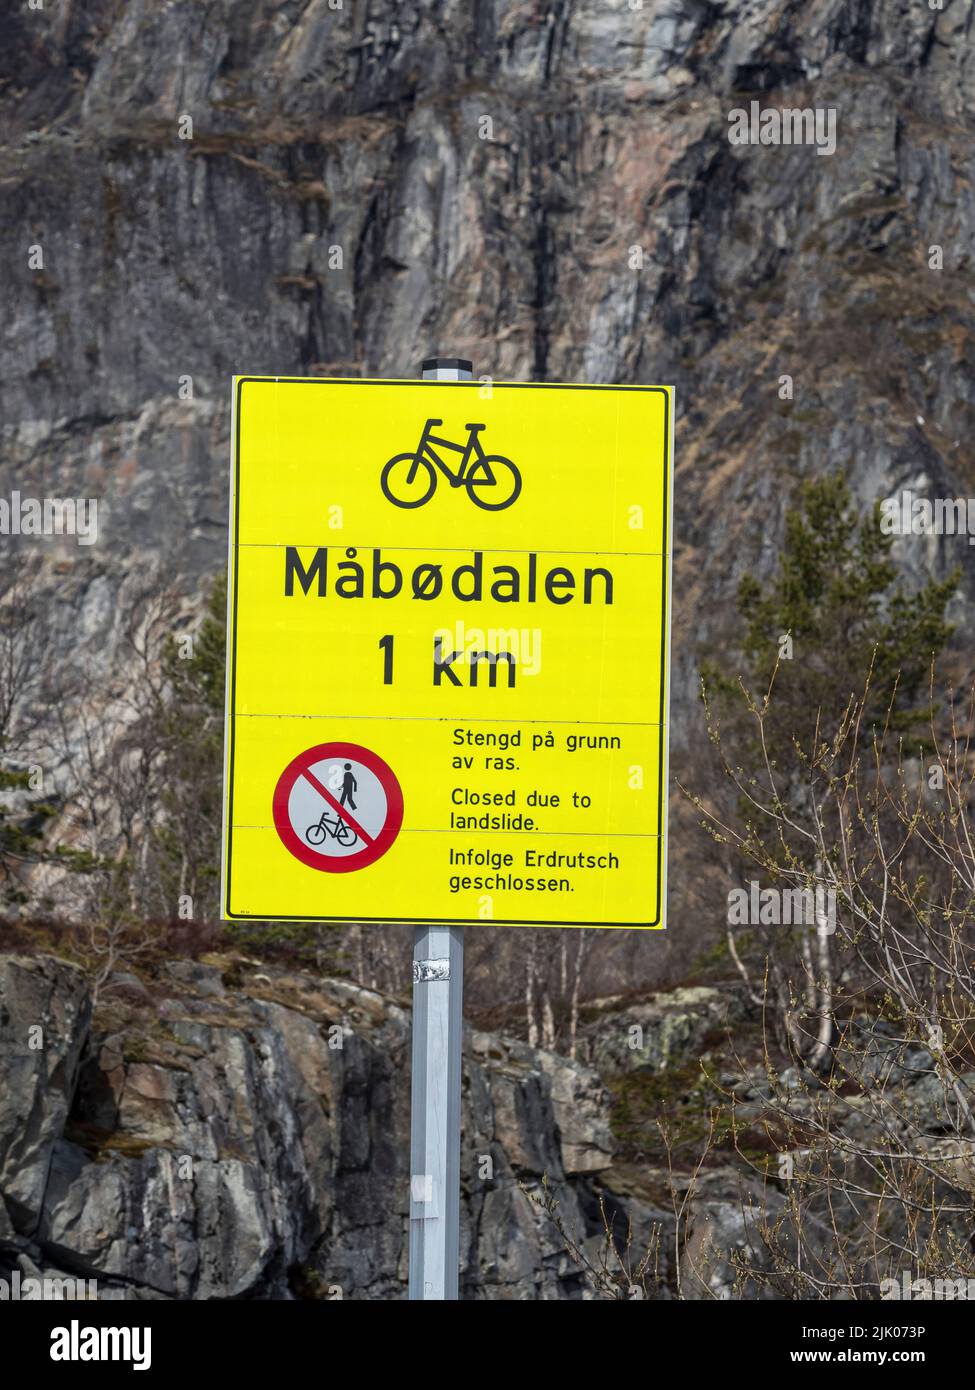 Signpost to tell that touristic cycle path is closed due to landslide, Mabodalen, Hardangervidda, Norway Stock Photo